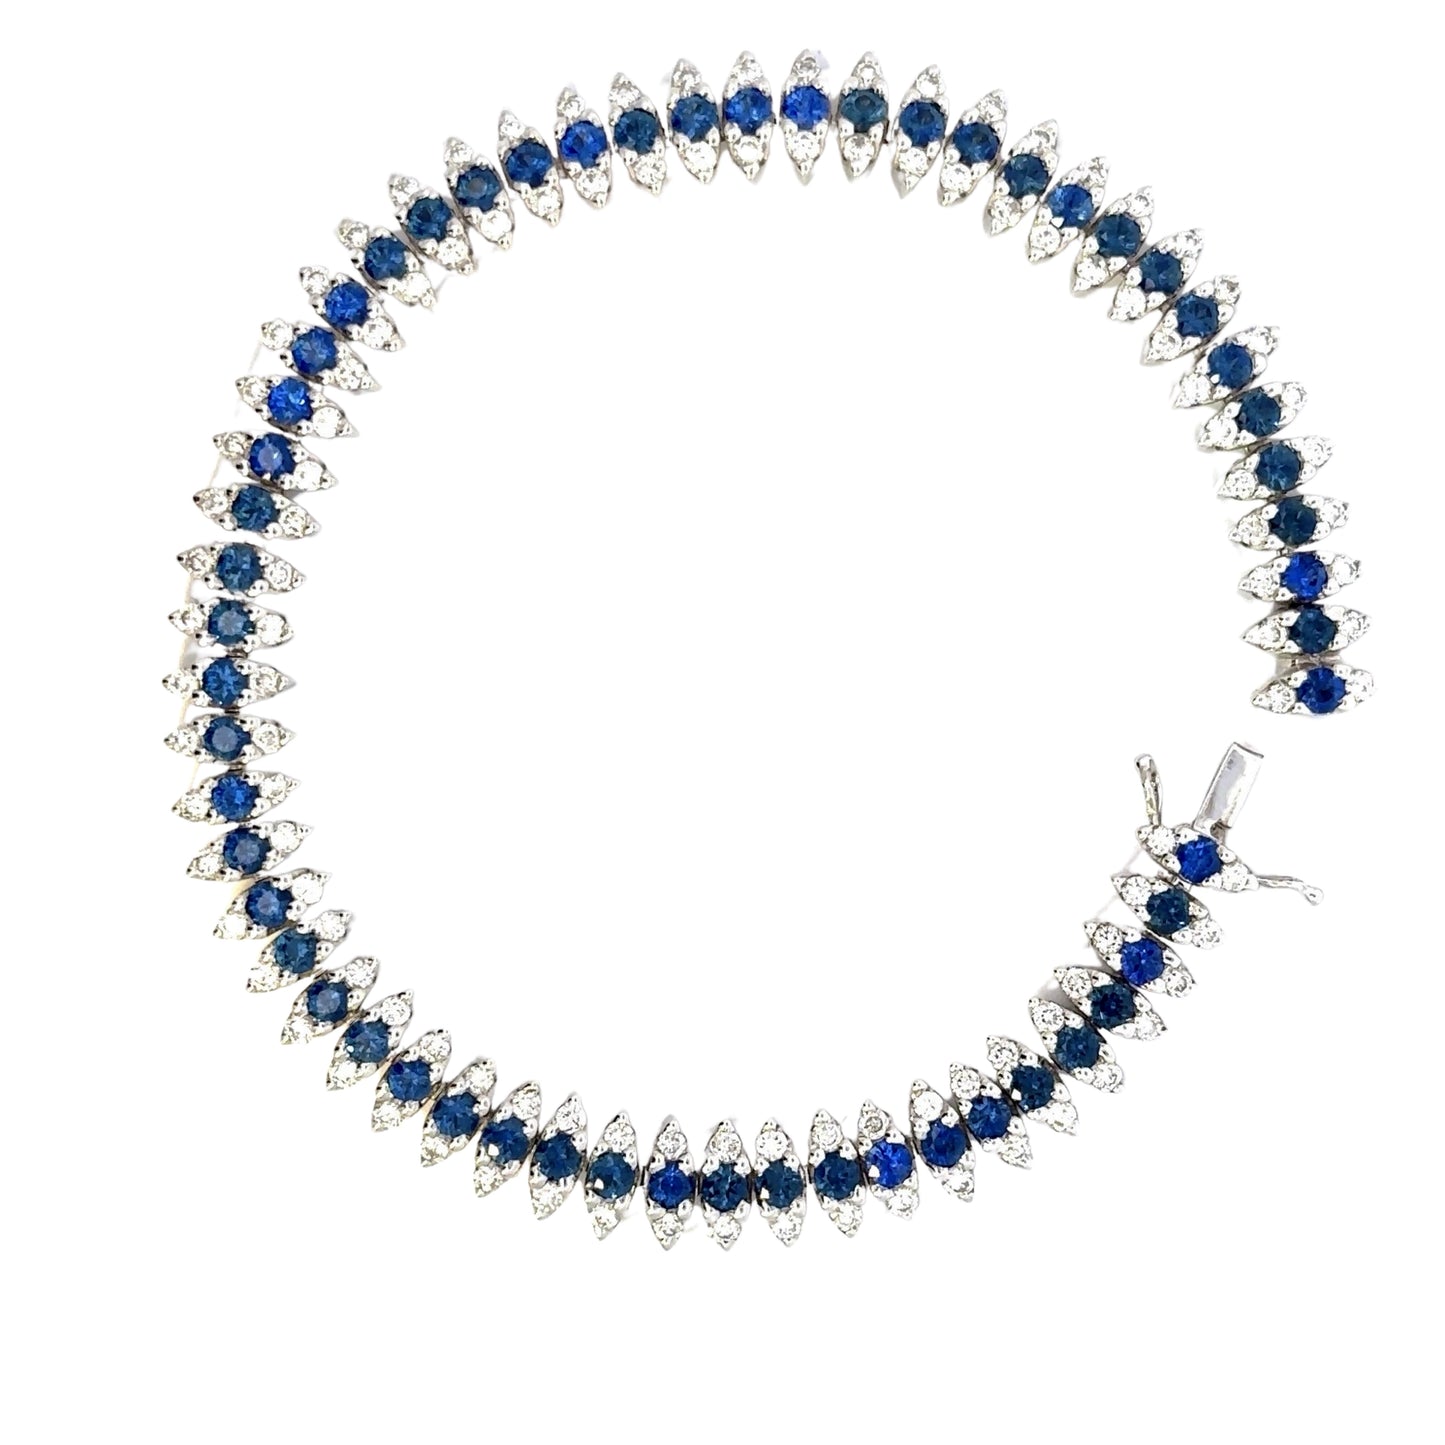 White Gold Diamond + Sapphire Bracelet with 57 rows of 2 small round diamonds with 1 blue sapphire between each diamond